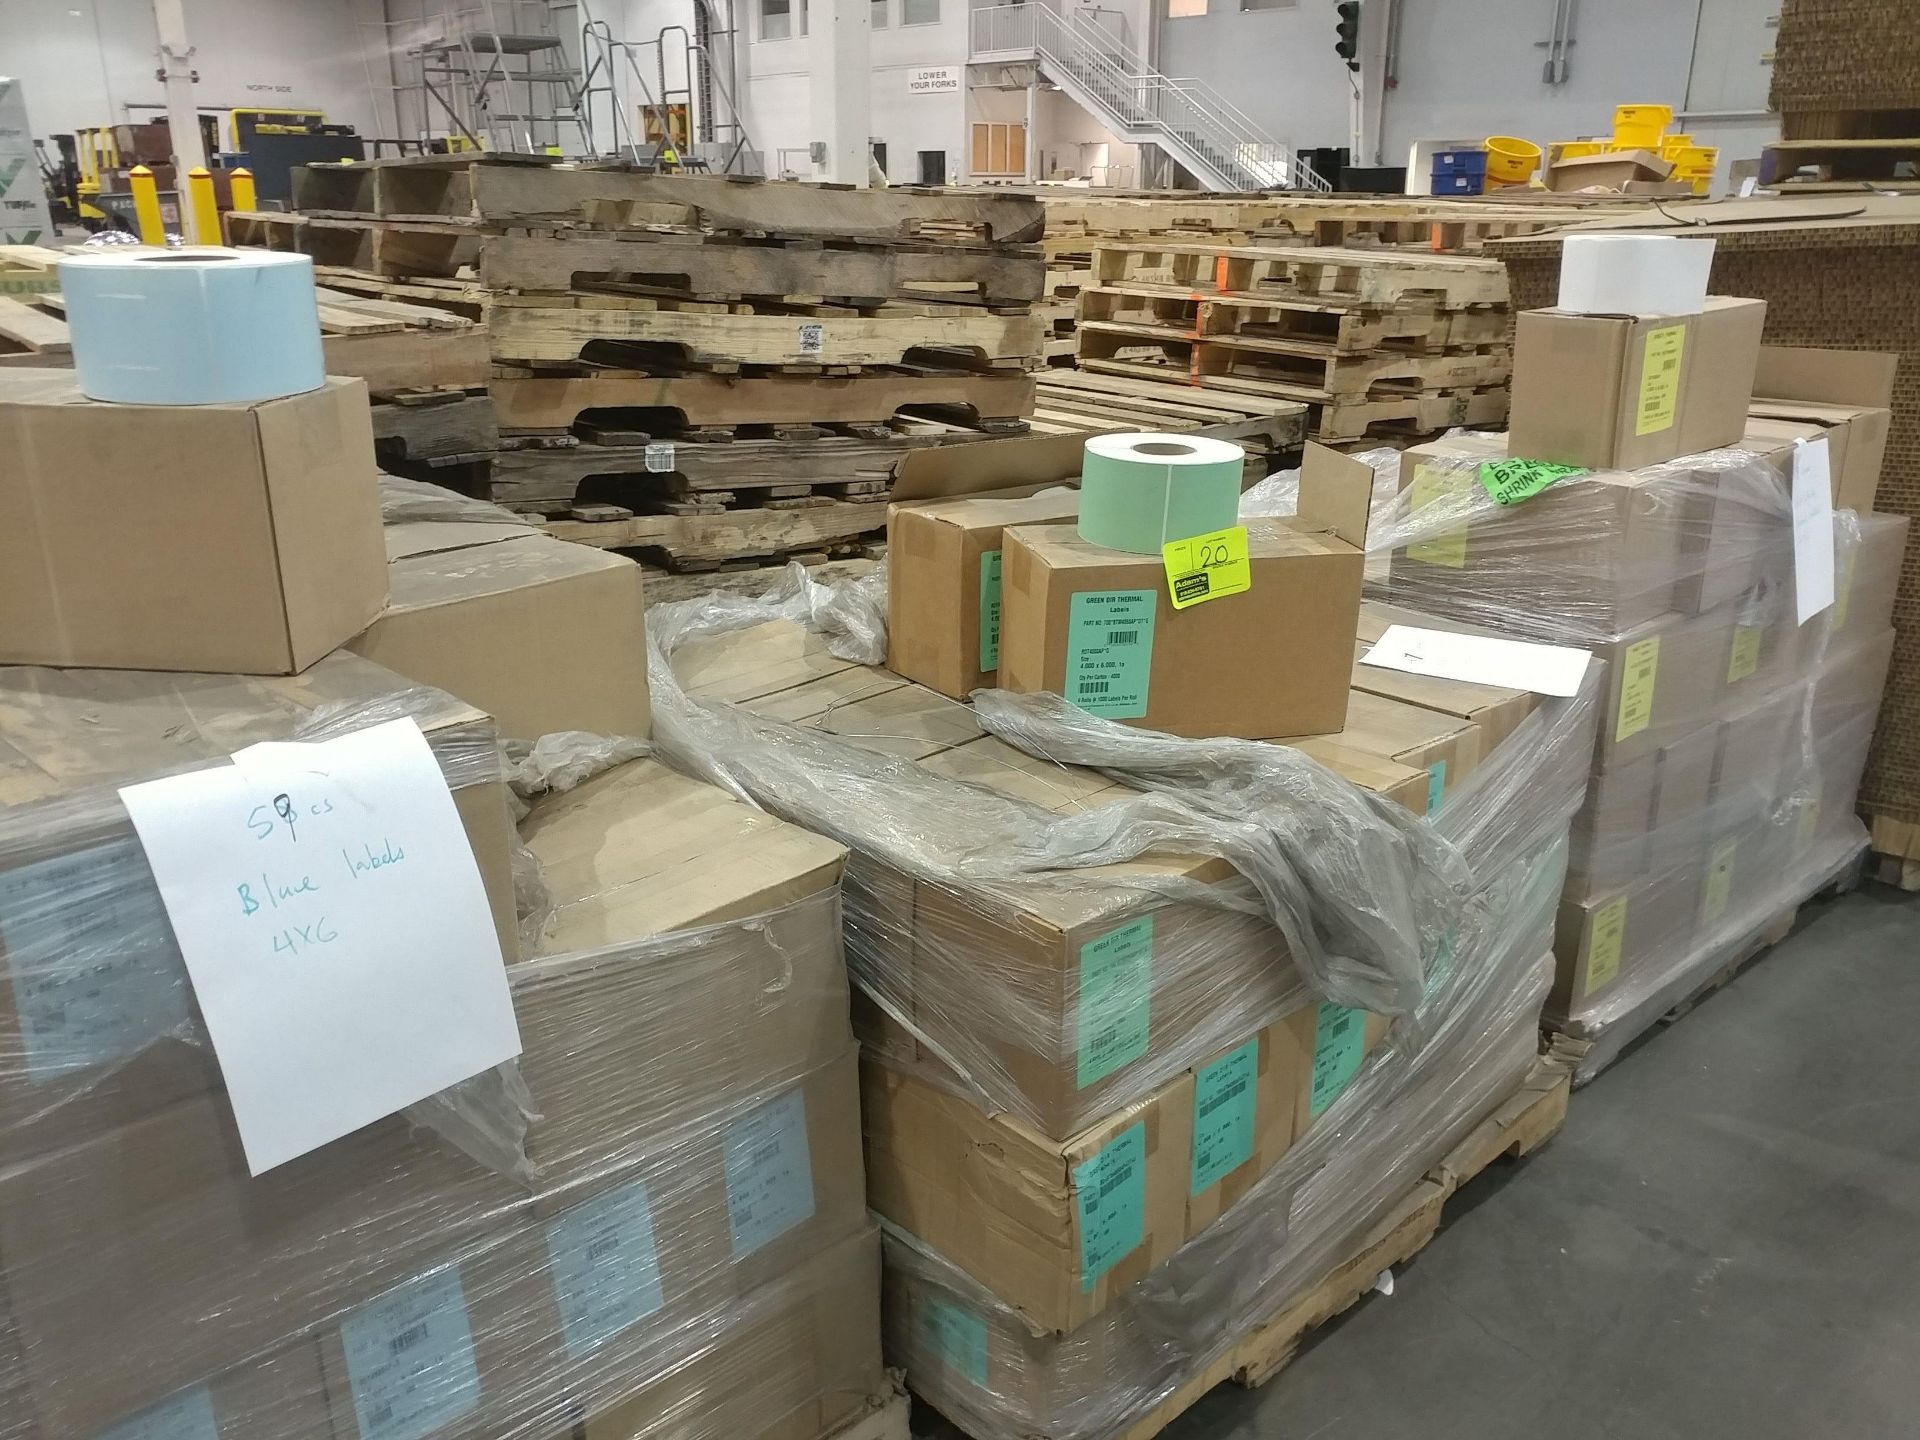 (3) palles of blue, green, and white labels